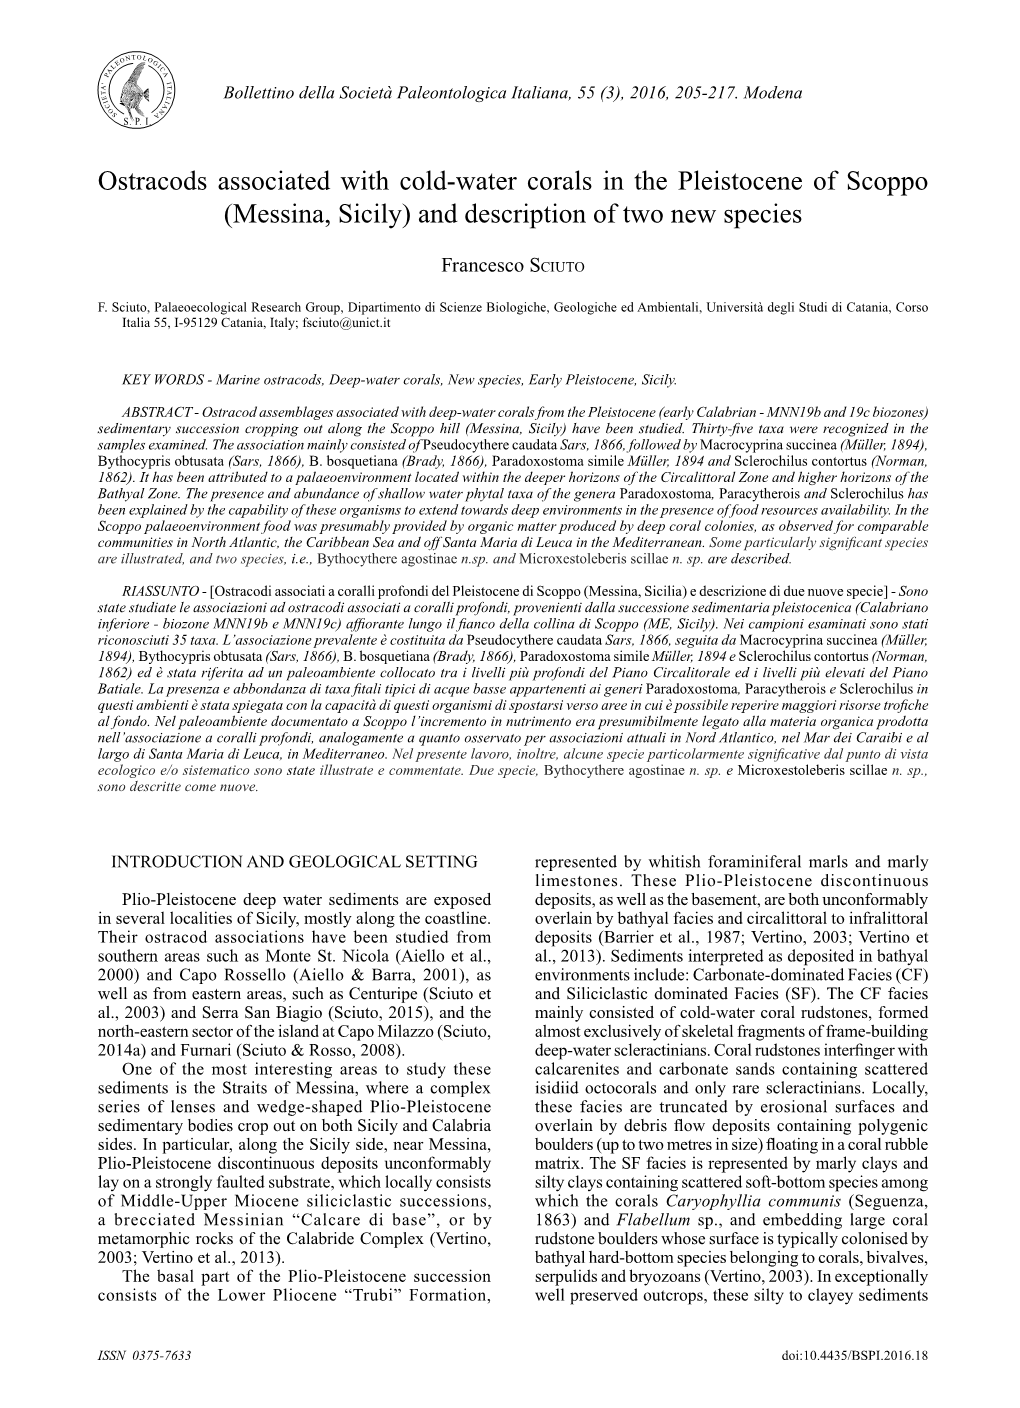 Ostracods Associated with Cold-Water Corals in the Pleistocene of Scoppo (Messina, Sicily) and Description of Two New Species